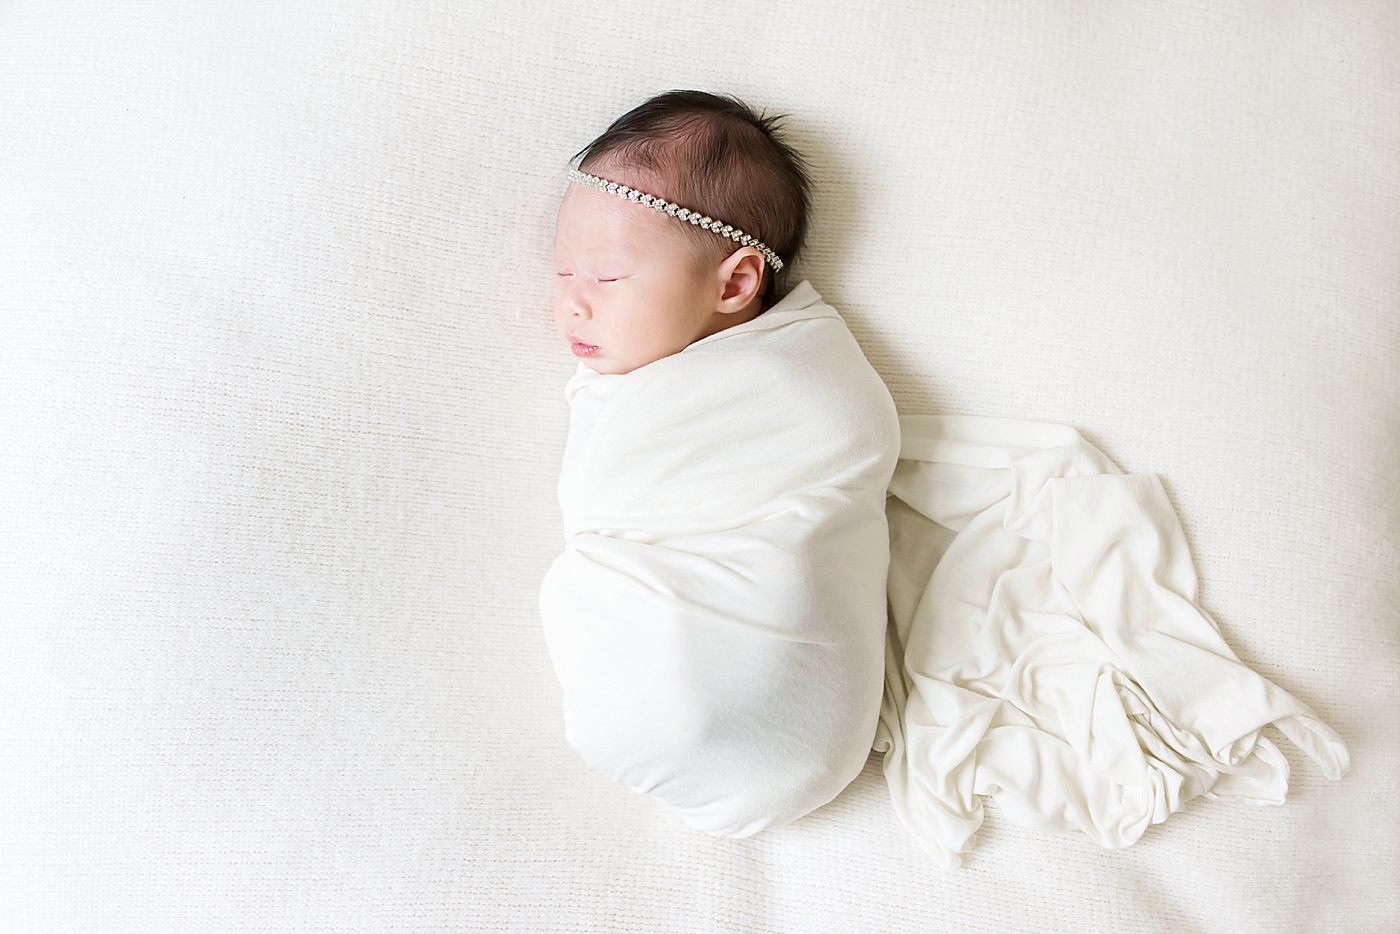 Newborn baby girl wrapped in a white swaddle with headband | Photo by Anna Wisjo Photography